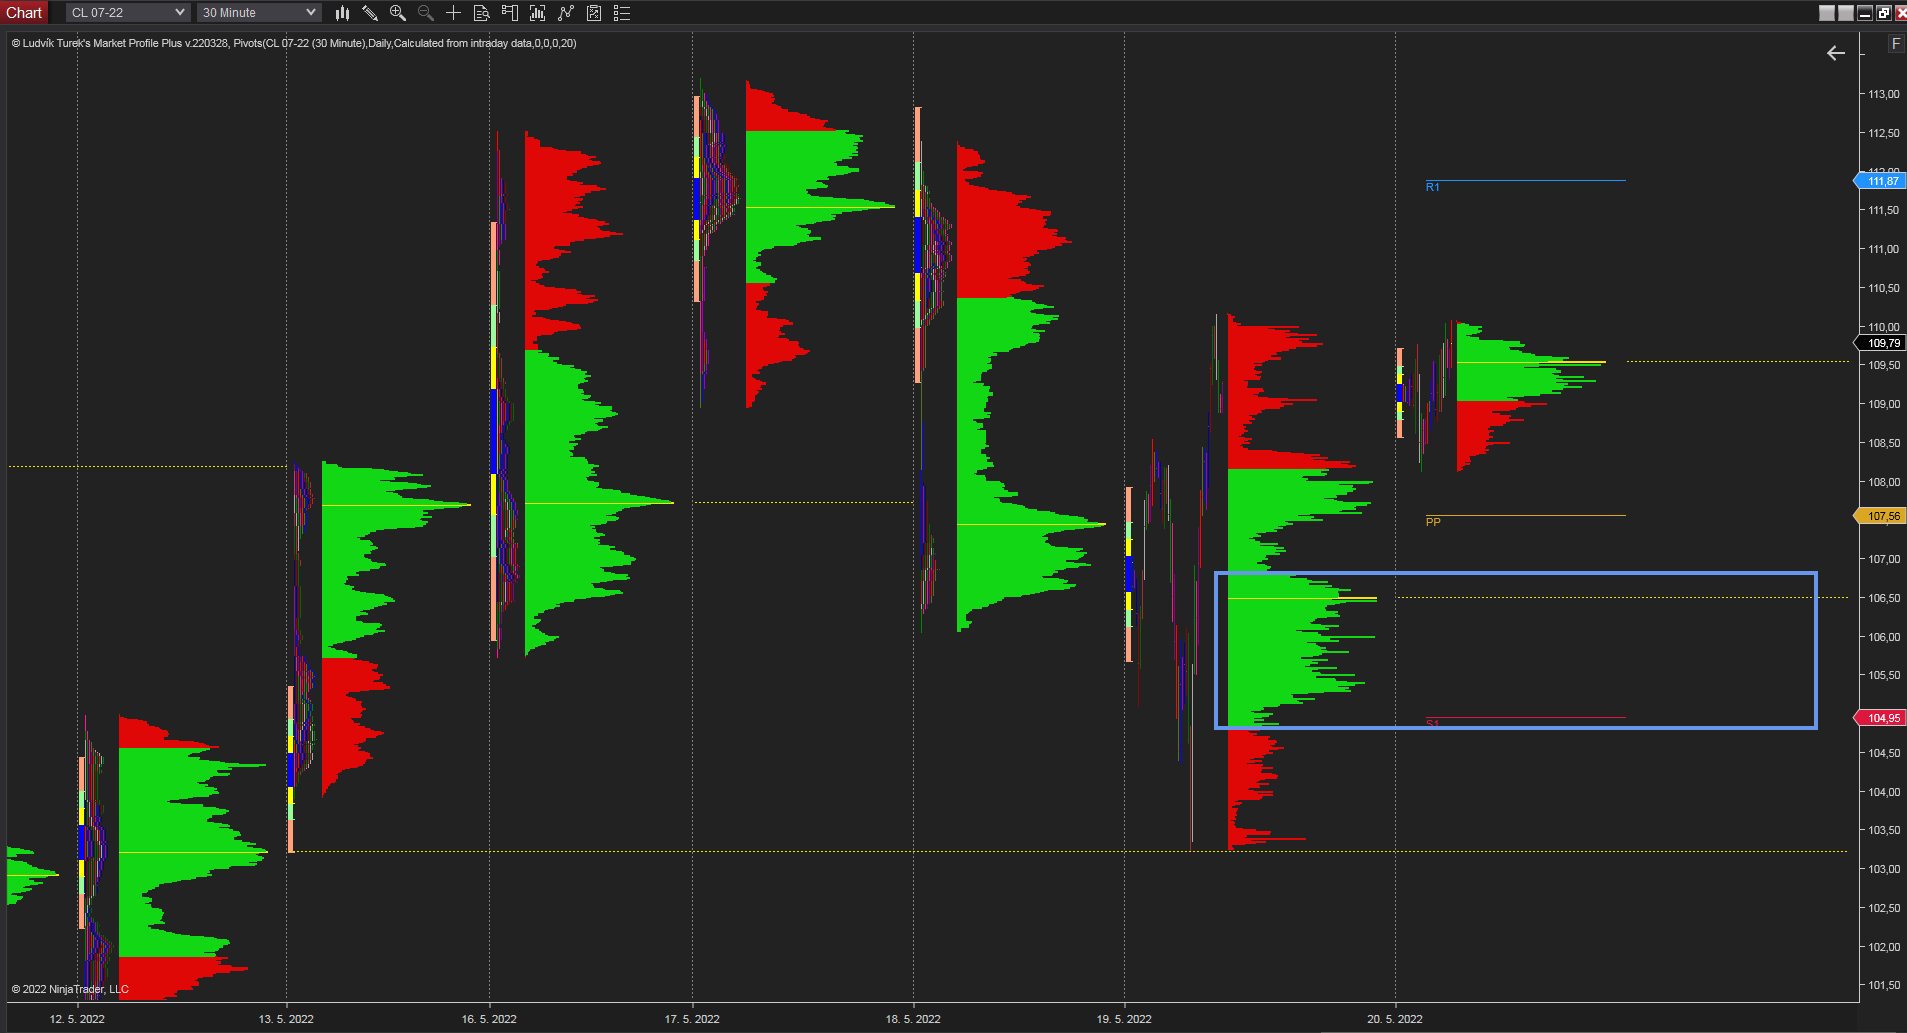 30 minutes chart of CL (crude oil futures), Daily Market Profile. Source: Author's analysis